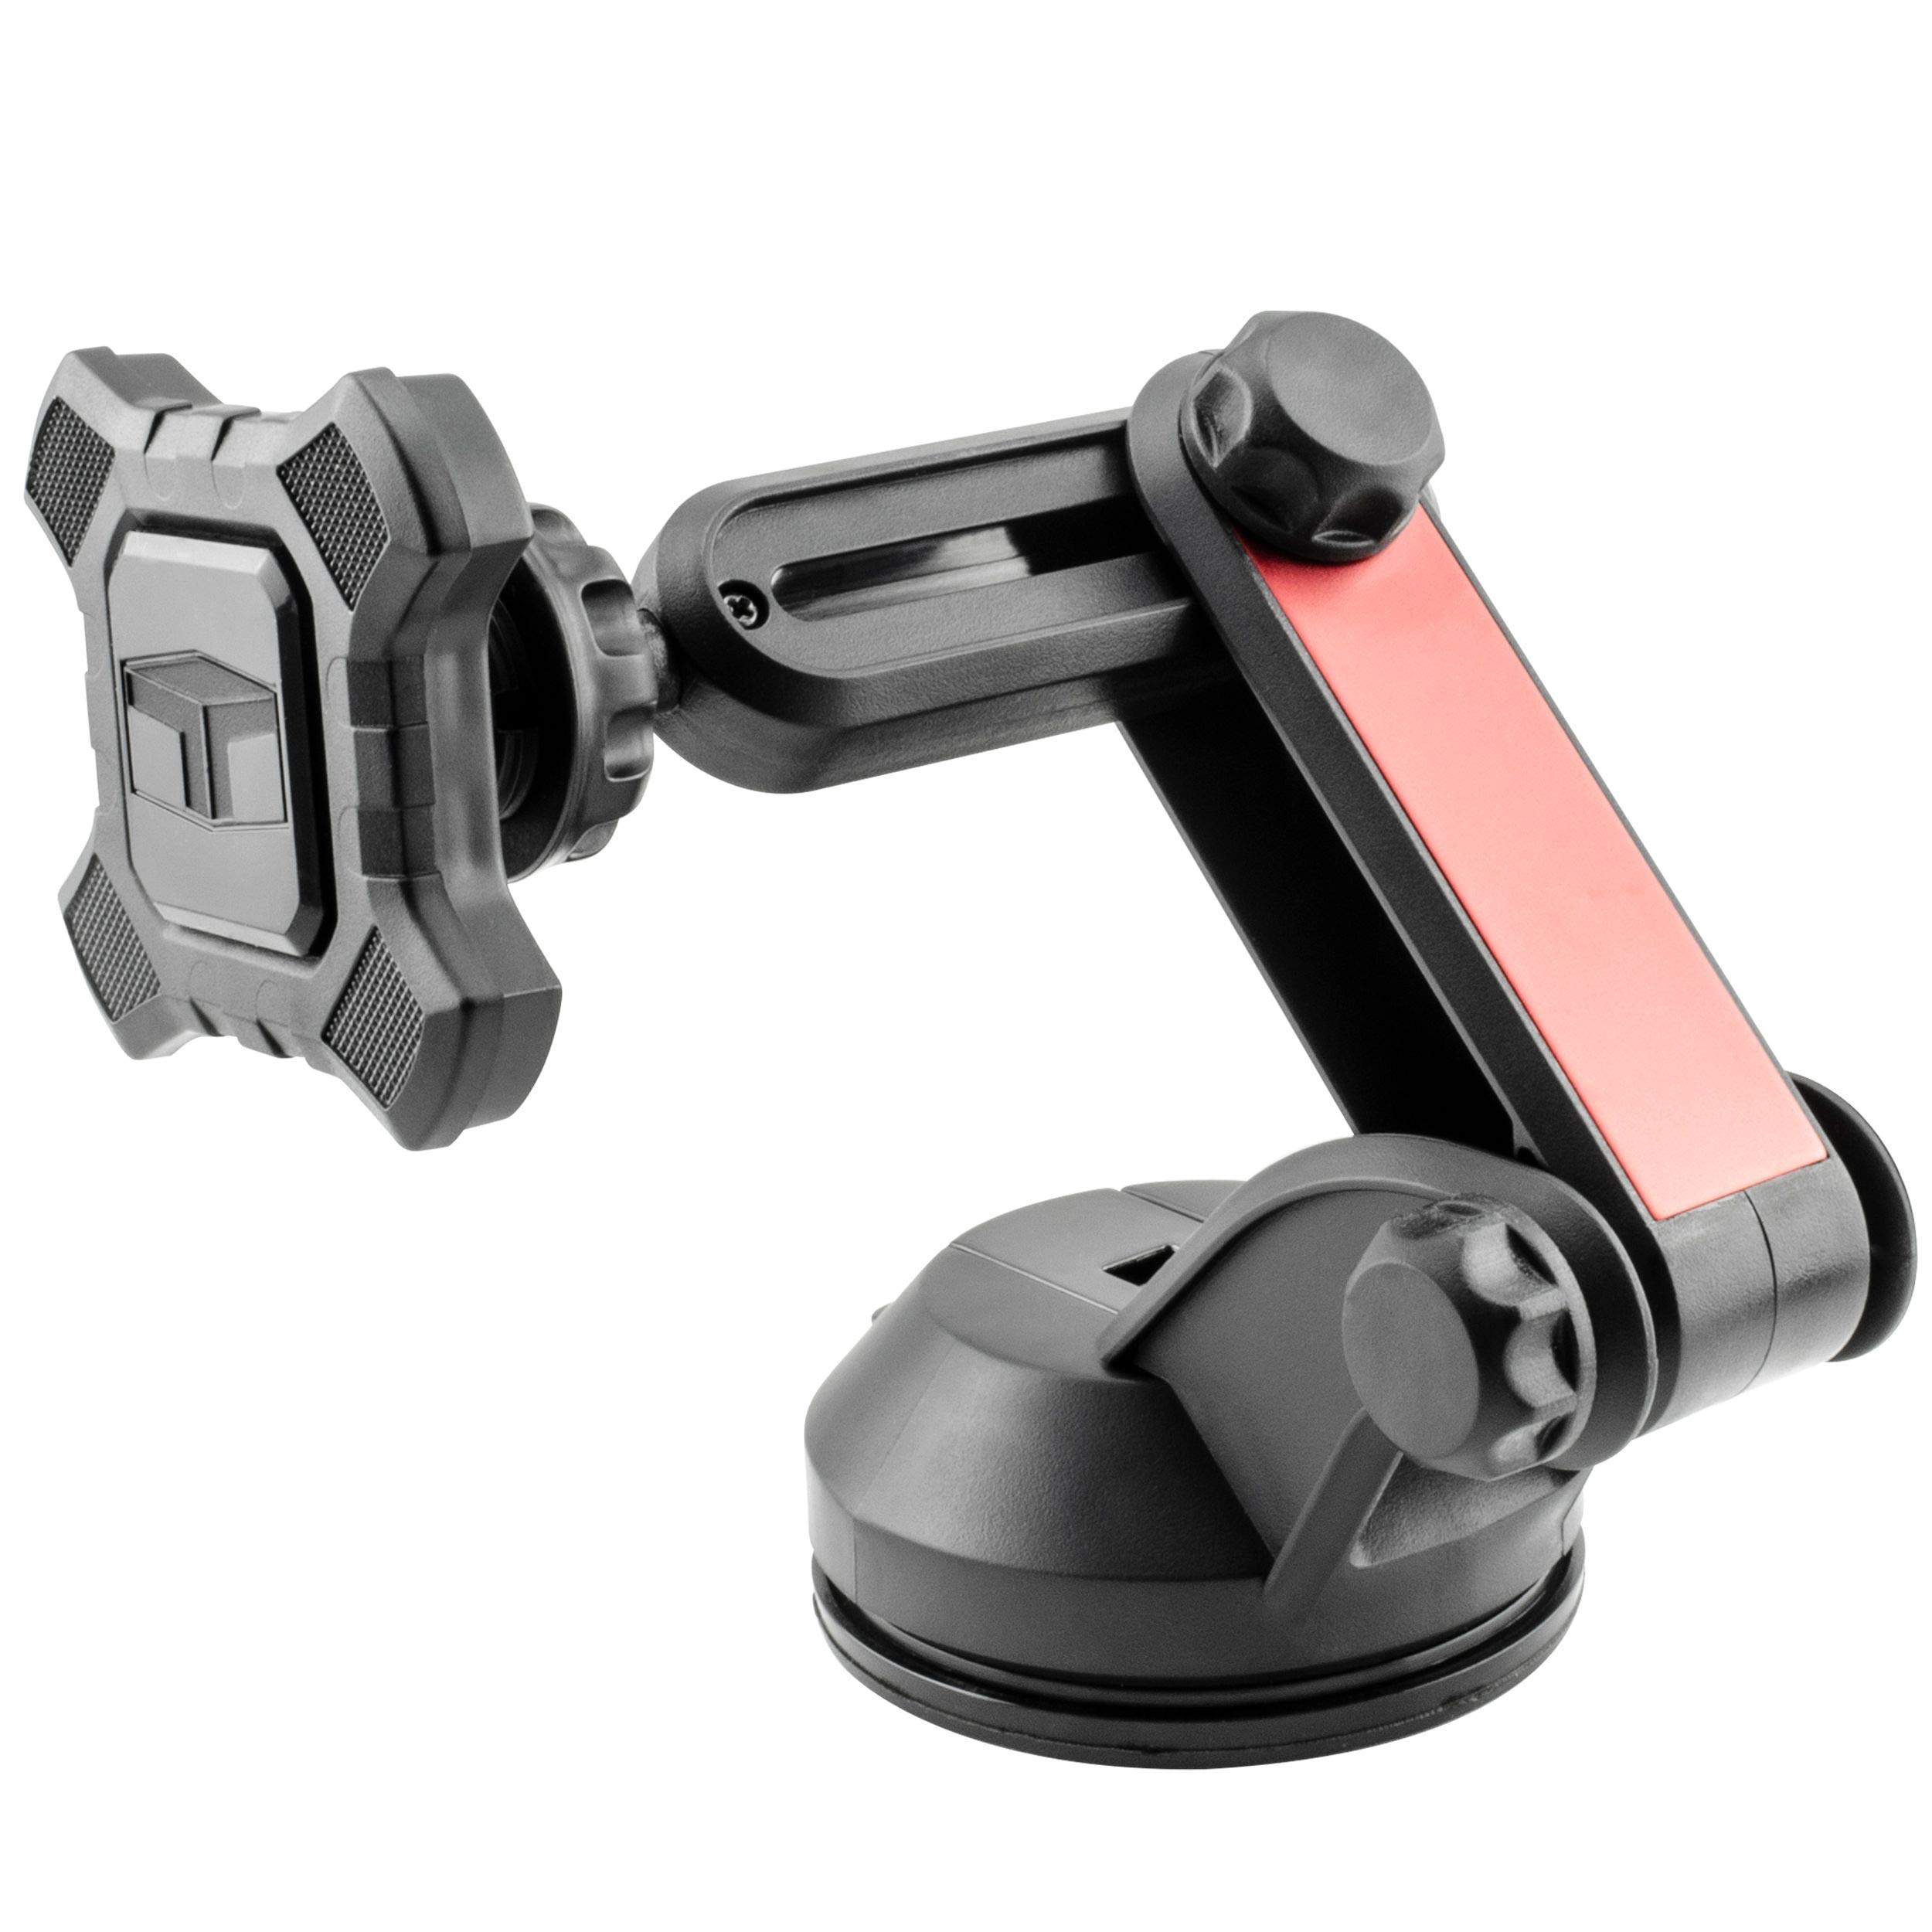 Tuff Tech - 24600 Super Stick Windshield/Dash Mount Magnetic Phone Holder with Extension Arm